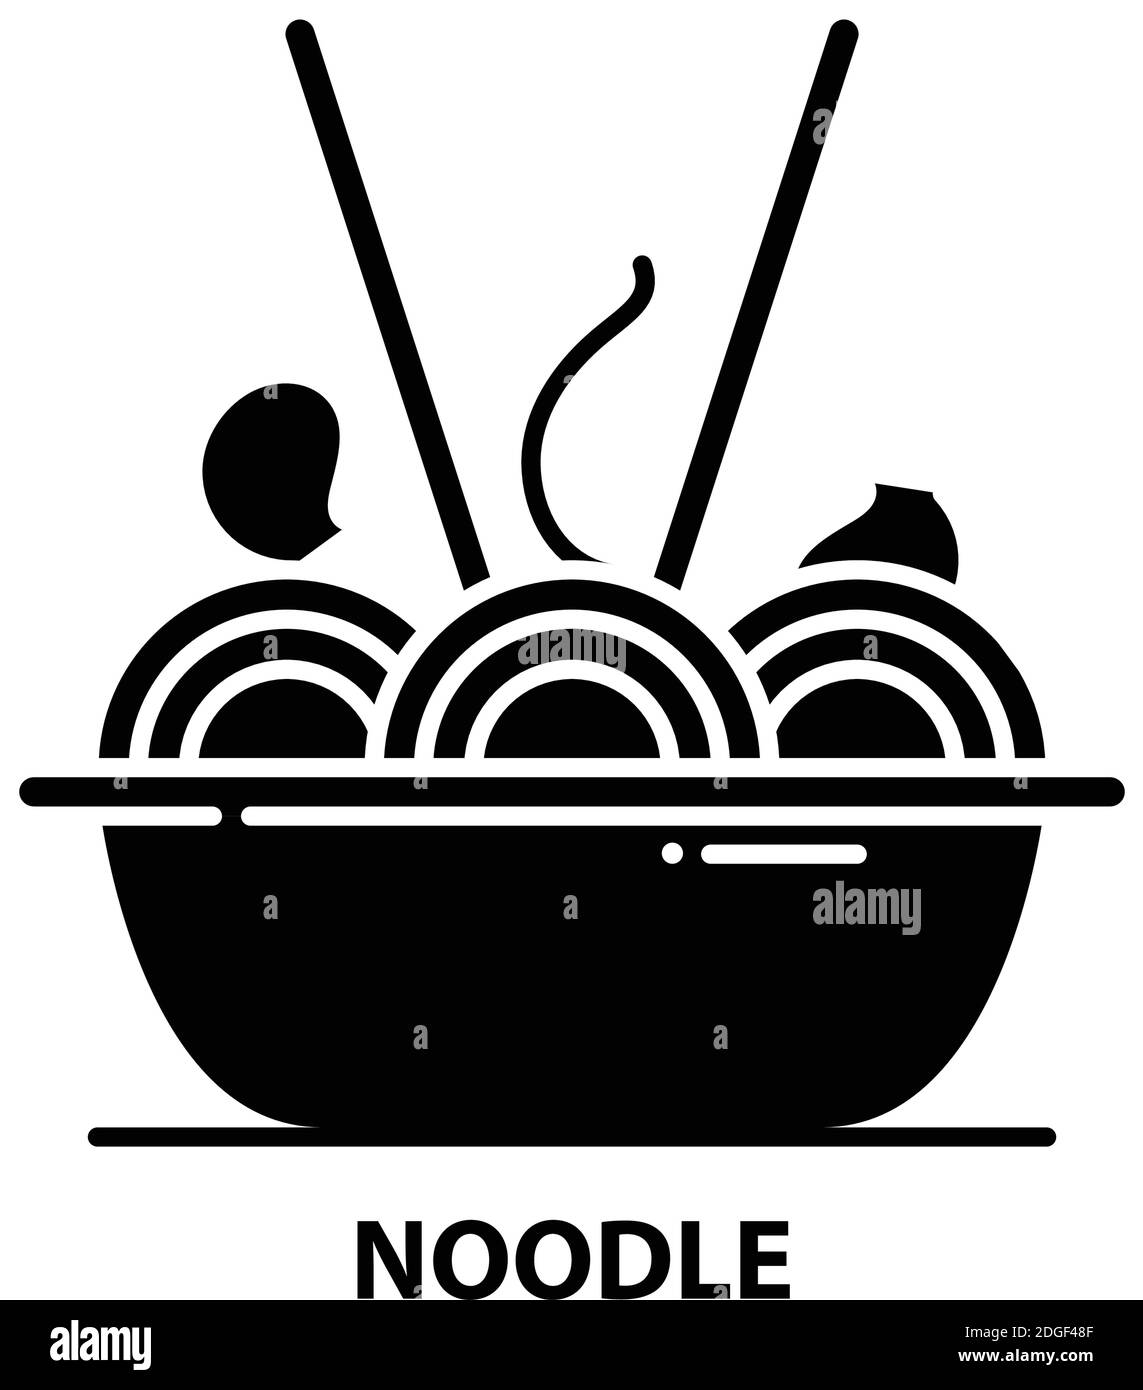 noodle icon, black vector sign with editable strokes, concept illustration Stock Vector